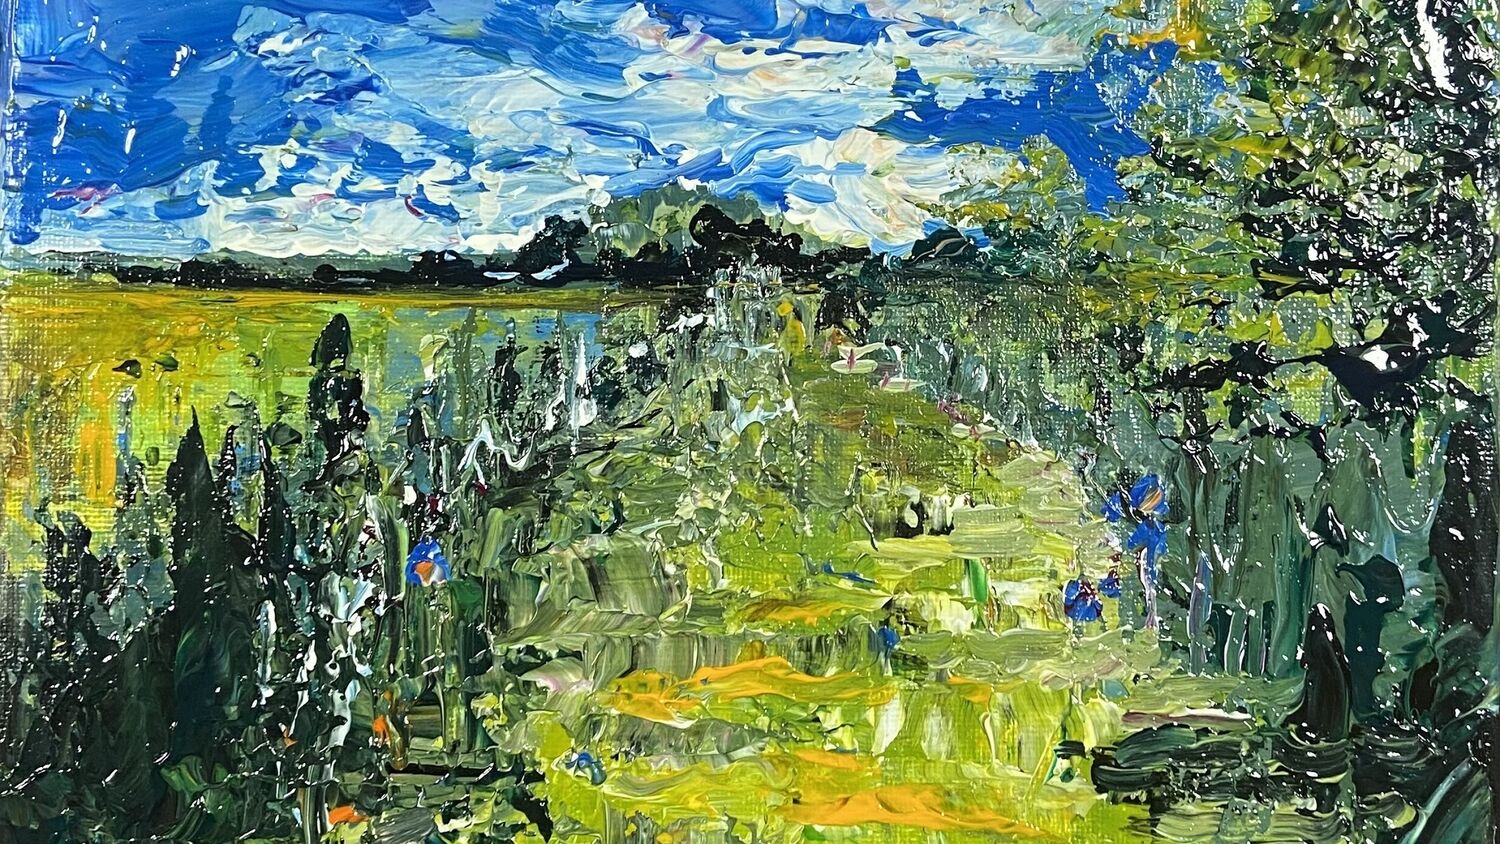 An abstract oil painting of a path through a green field on a sunny day. Tall blue poppies grow among the long grass.